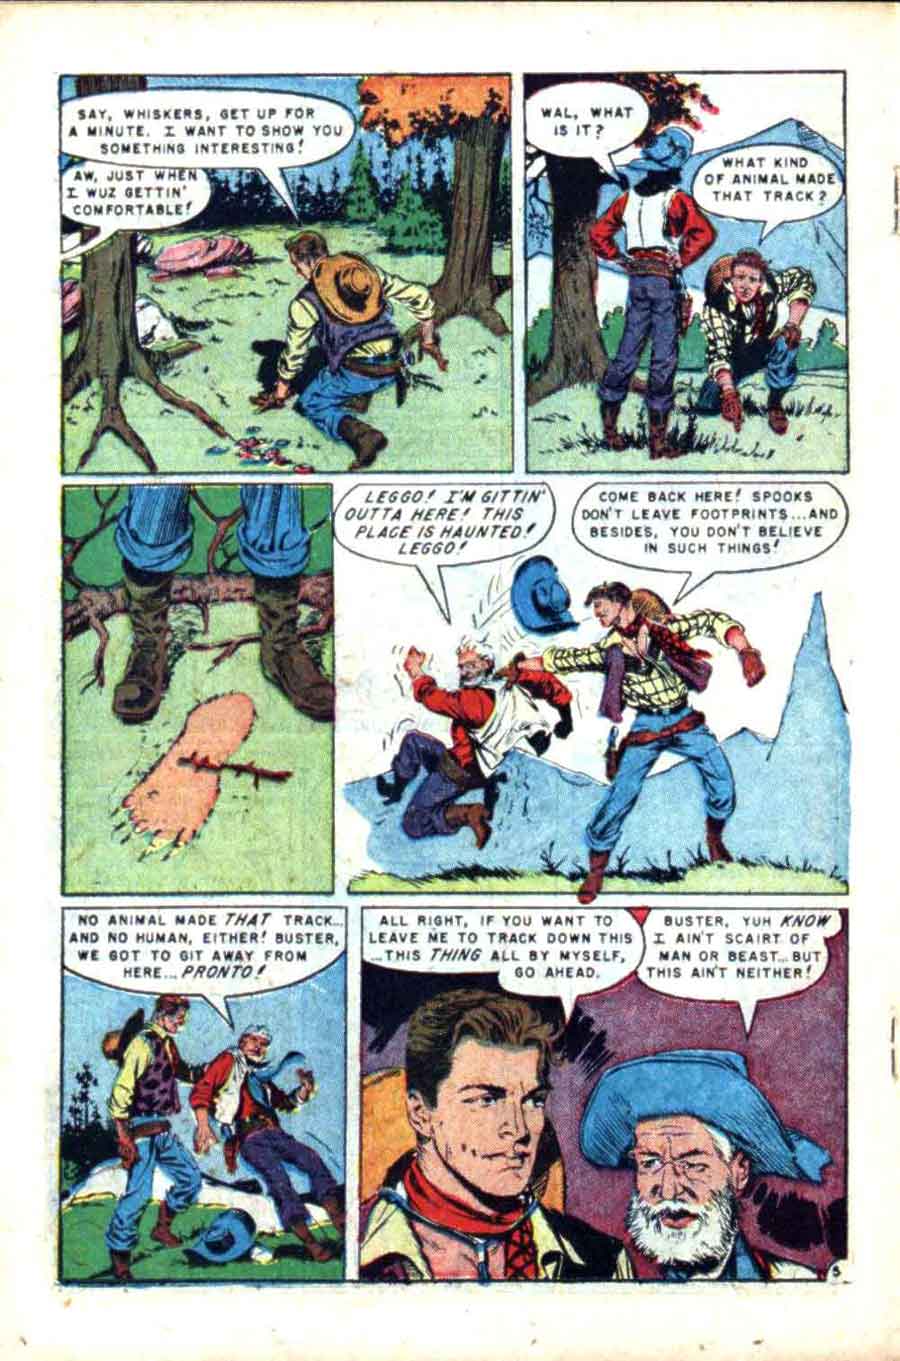 Buster Crabbe v1 #3 golden age comic book page art by Al Williamson